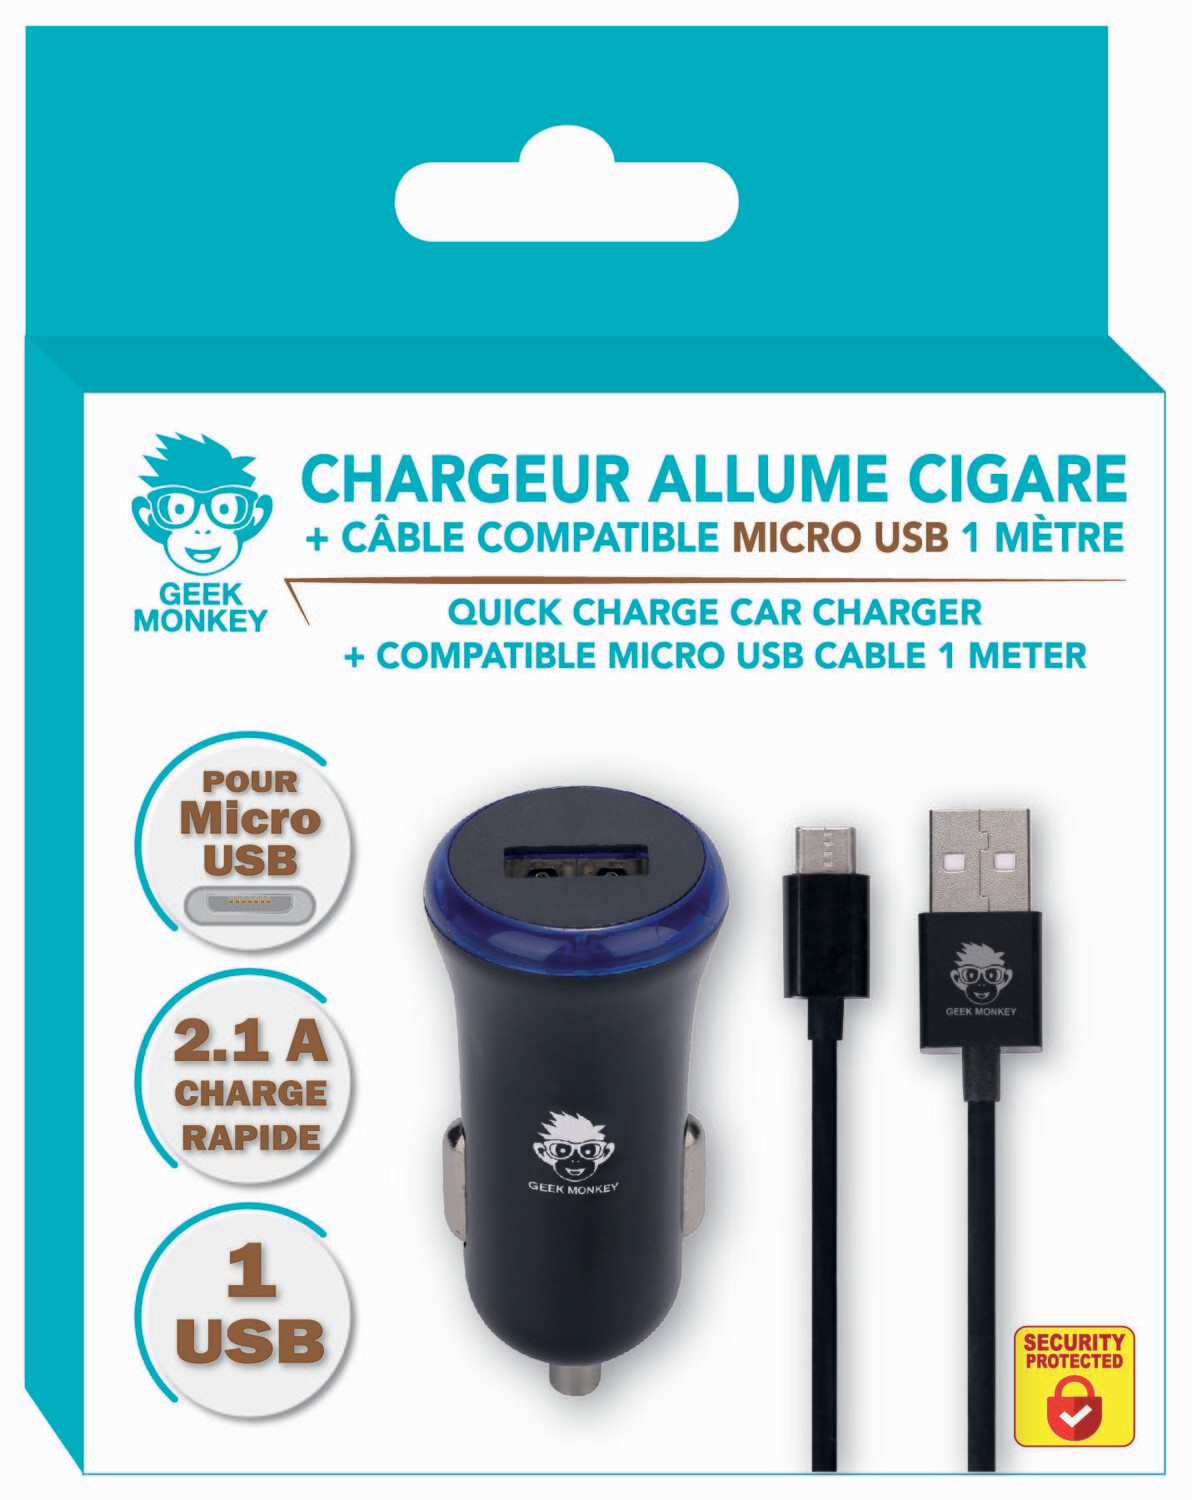 CHARGEUR ALLUME CIGARE 1 USB 2.1A+CABLE MICRO USB QUICK CHARGE *